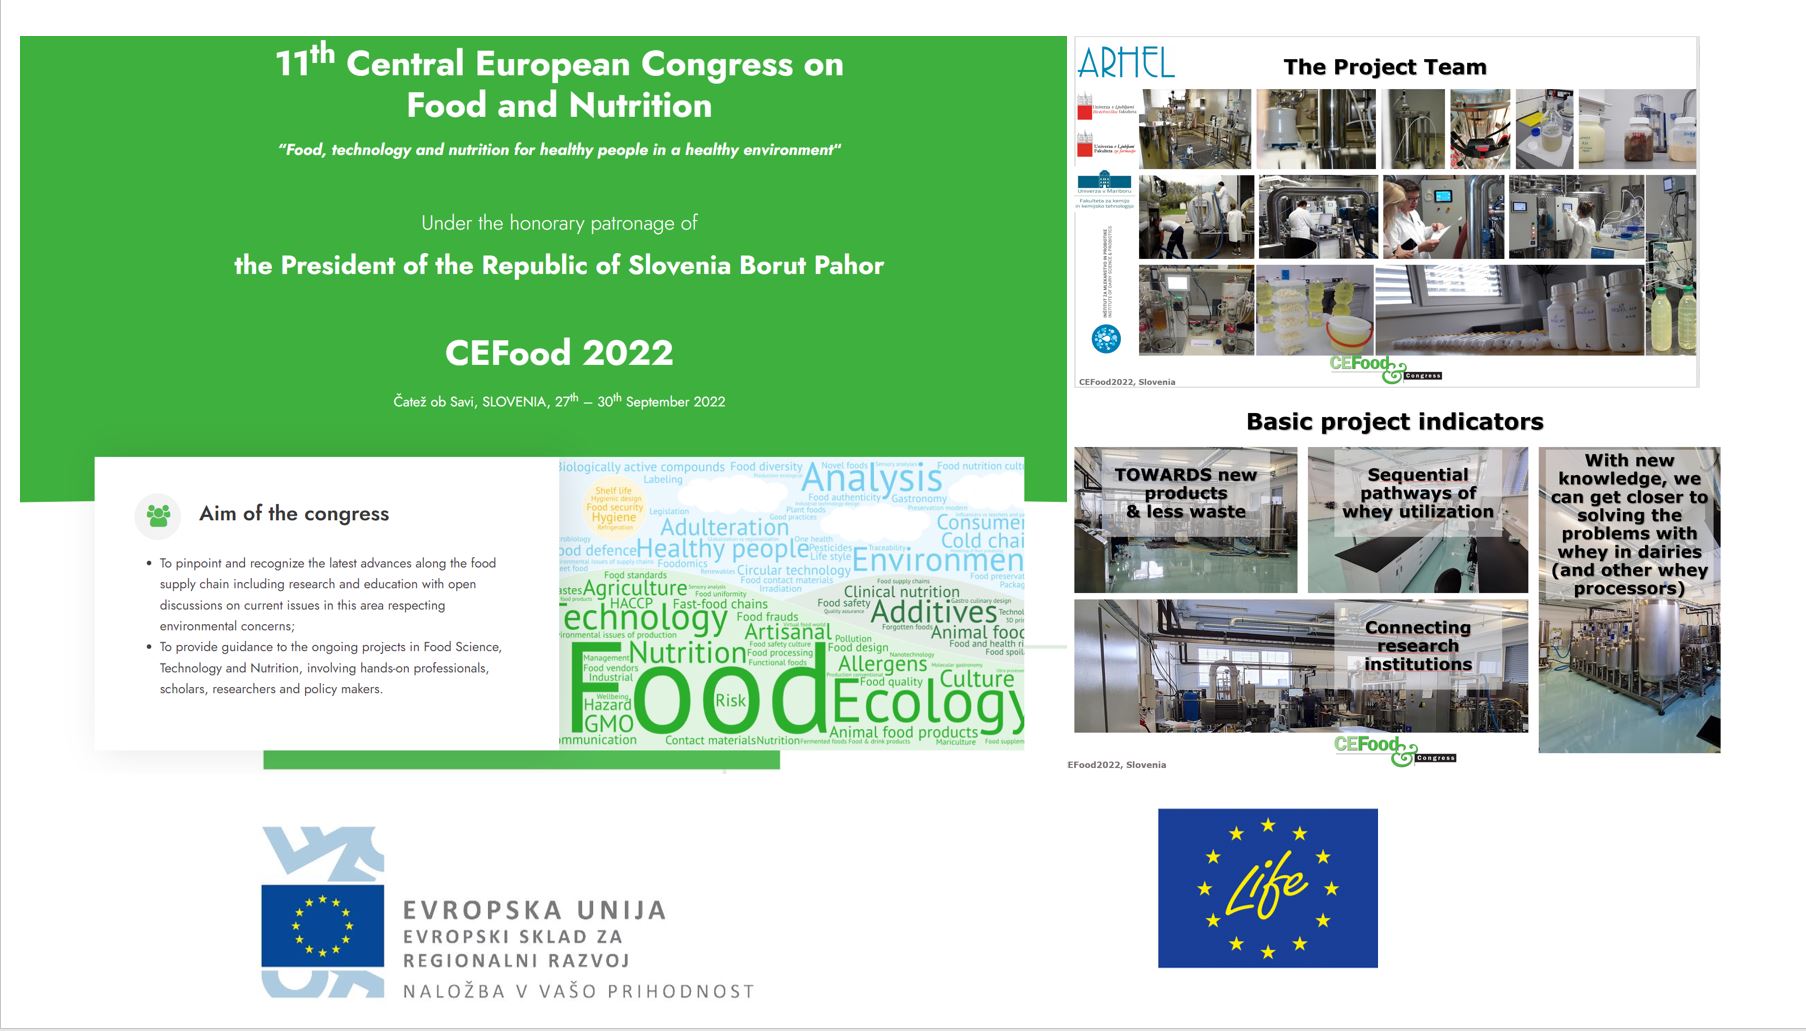 CEFood 2022 Congress on Food and Nutrition